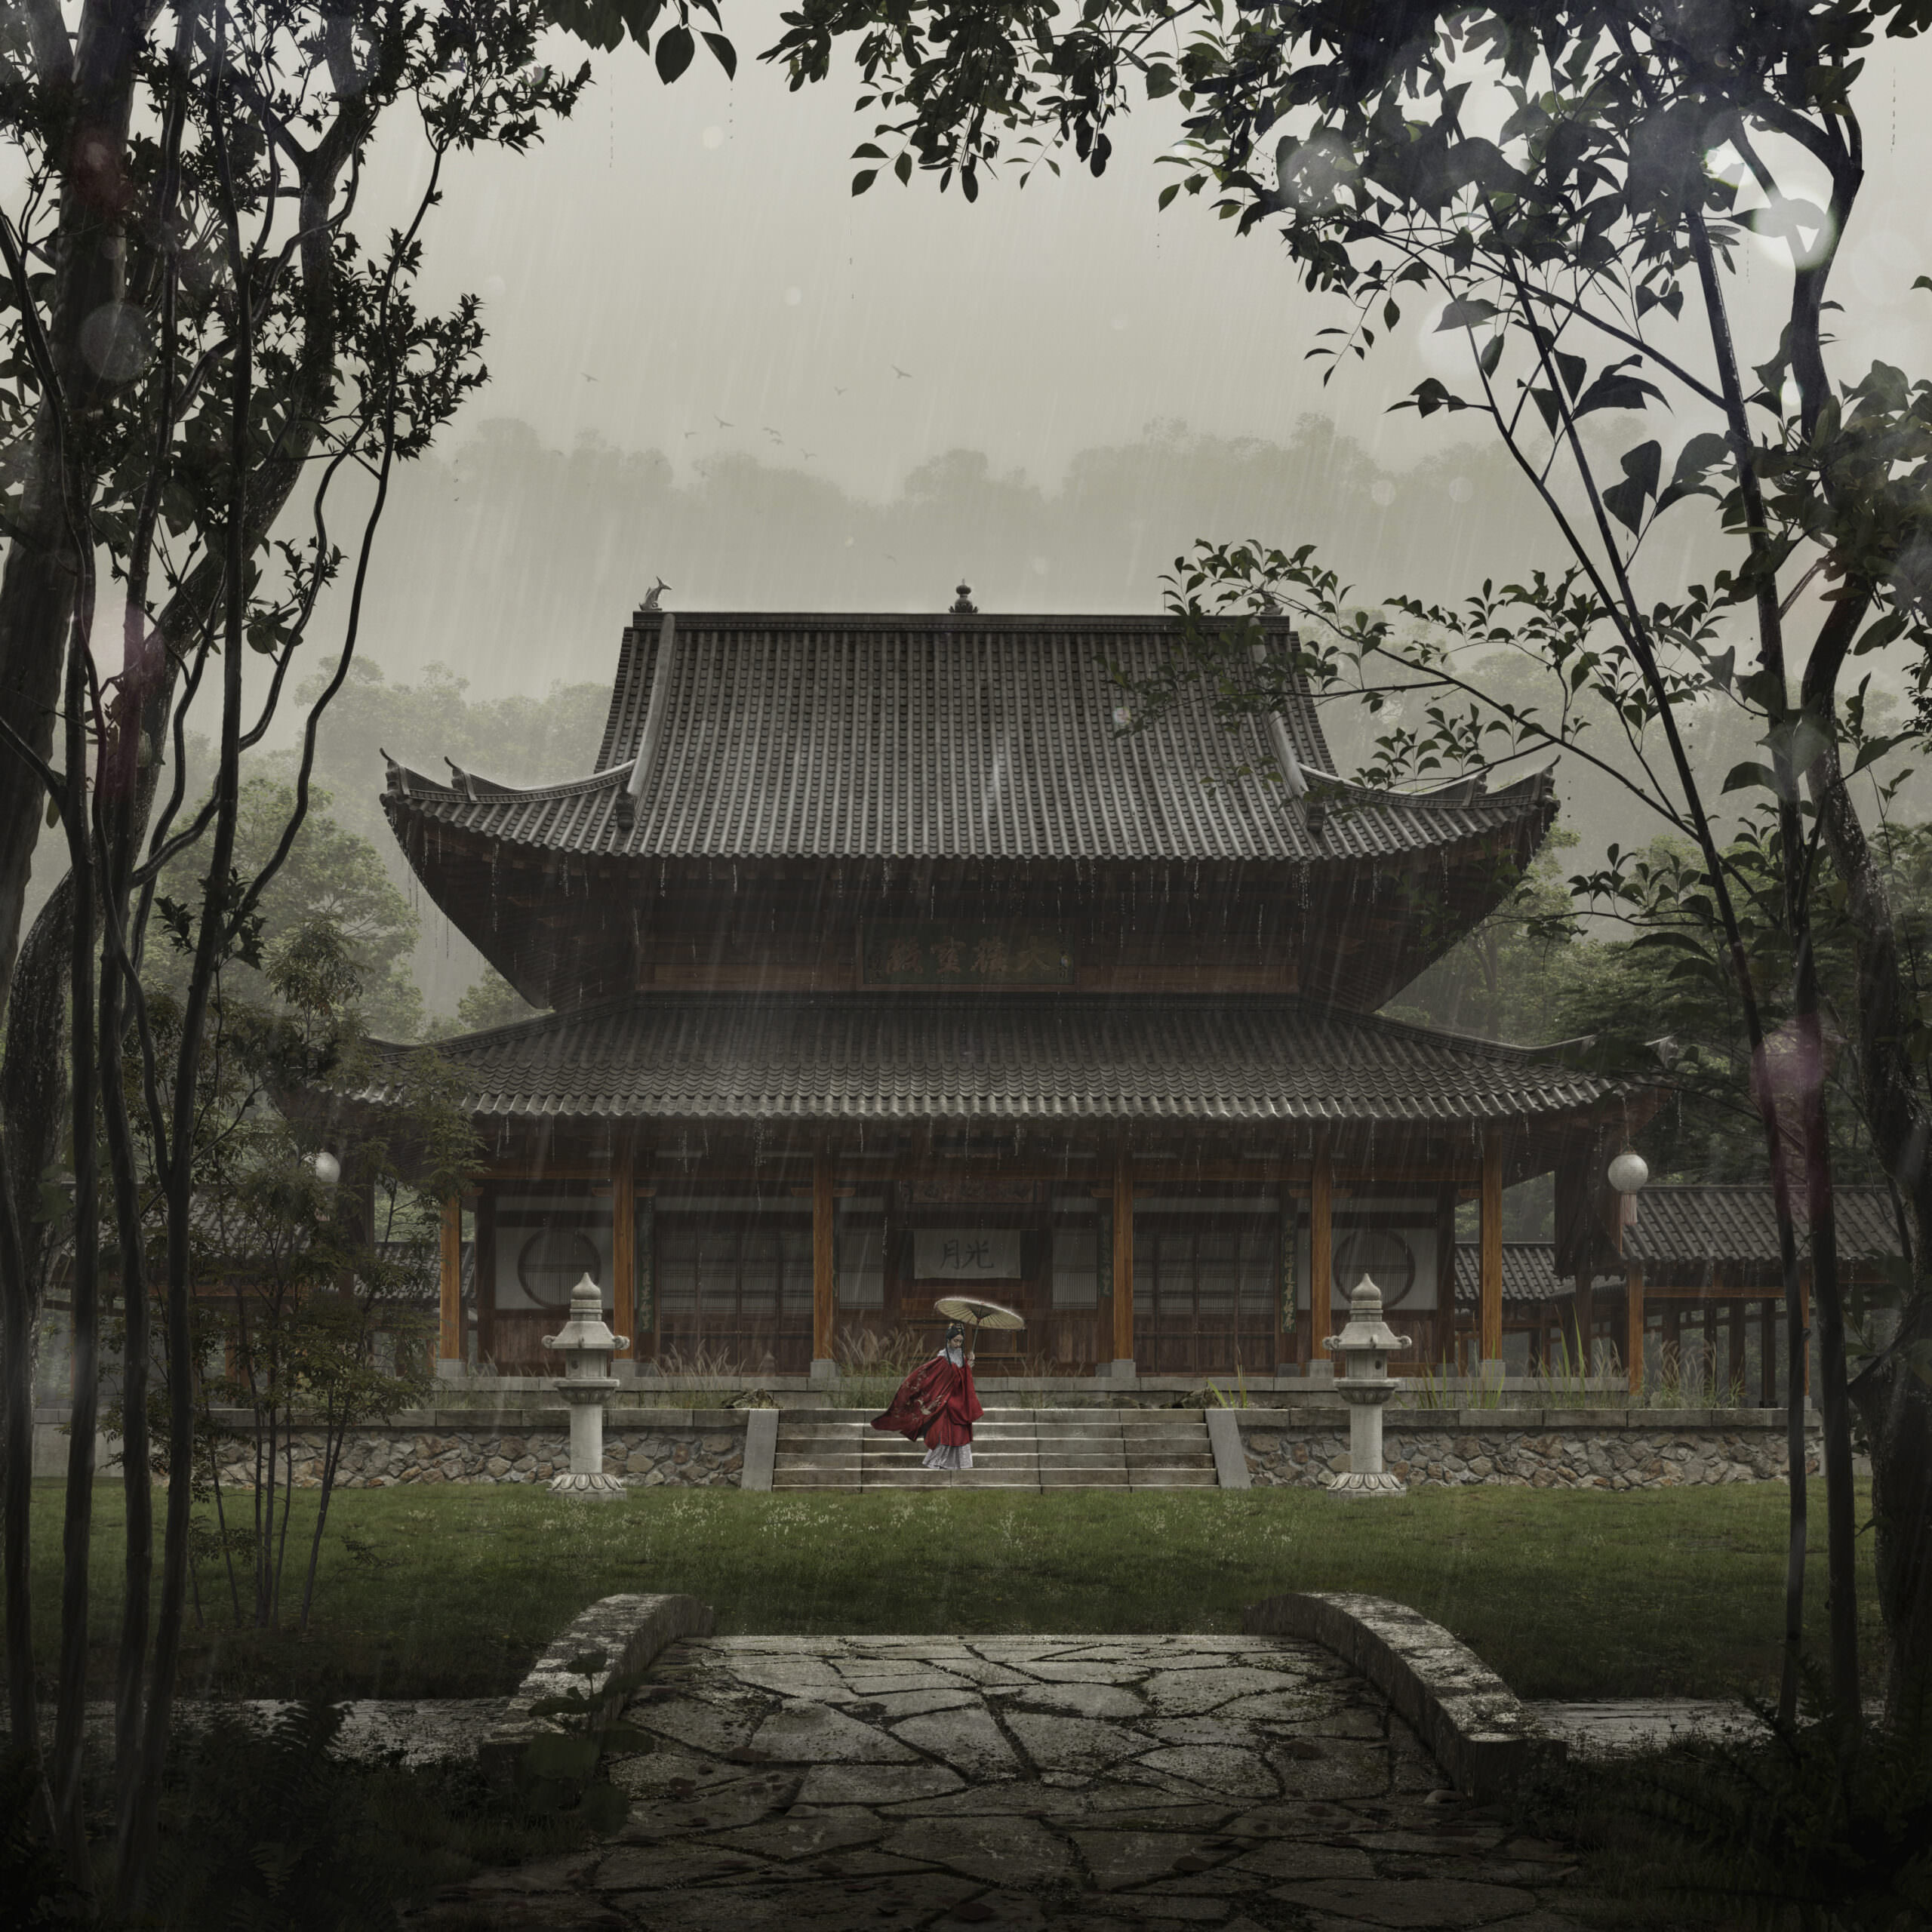 3D rendering of traditional architecture of the Chinese pagoda in a rainy forest with a silhouette of a geisha holding an umbrella